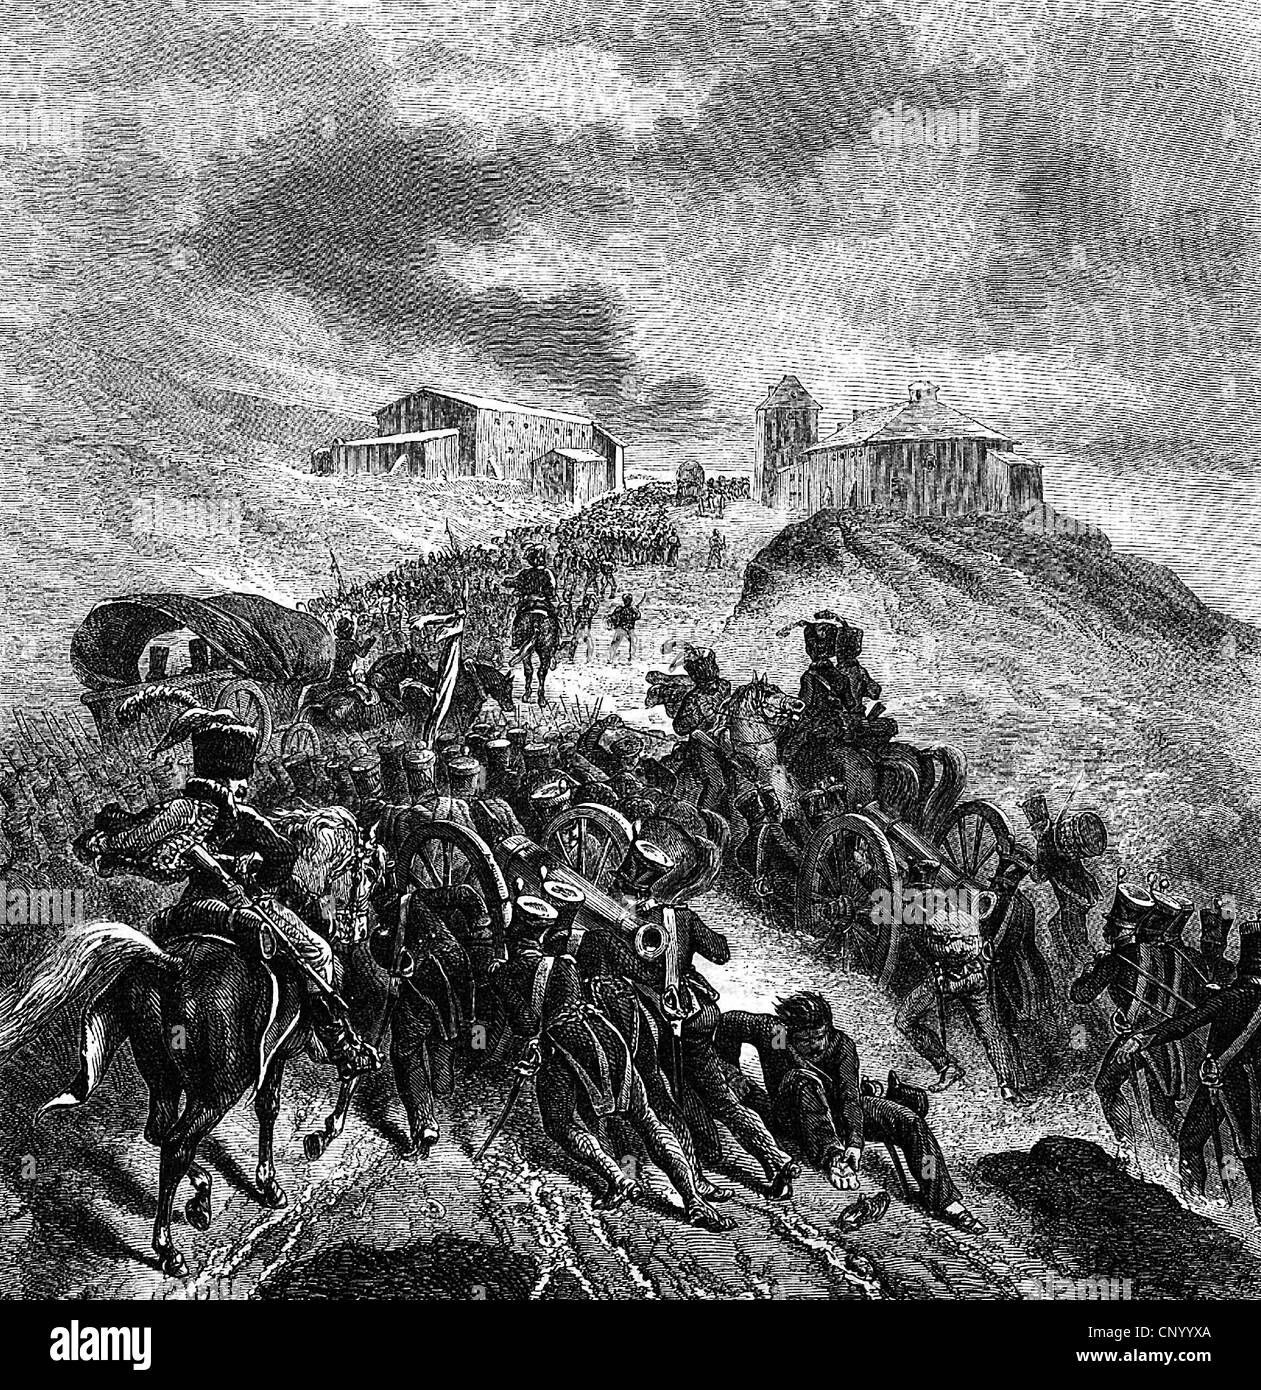 war in Spain, 1808 - 1814, French troops reach Guadarrama, circa 1808, engraving by Janet-Lange, after painting by Taunay, 19th century, war, wars, military, campaign, campaigns, France, march, marching, artillery, infantry, footsore, Napoleonic Wars, exhausted, historic, historical, people, Additional-Rights-Clearences-Not Available Stock Photo